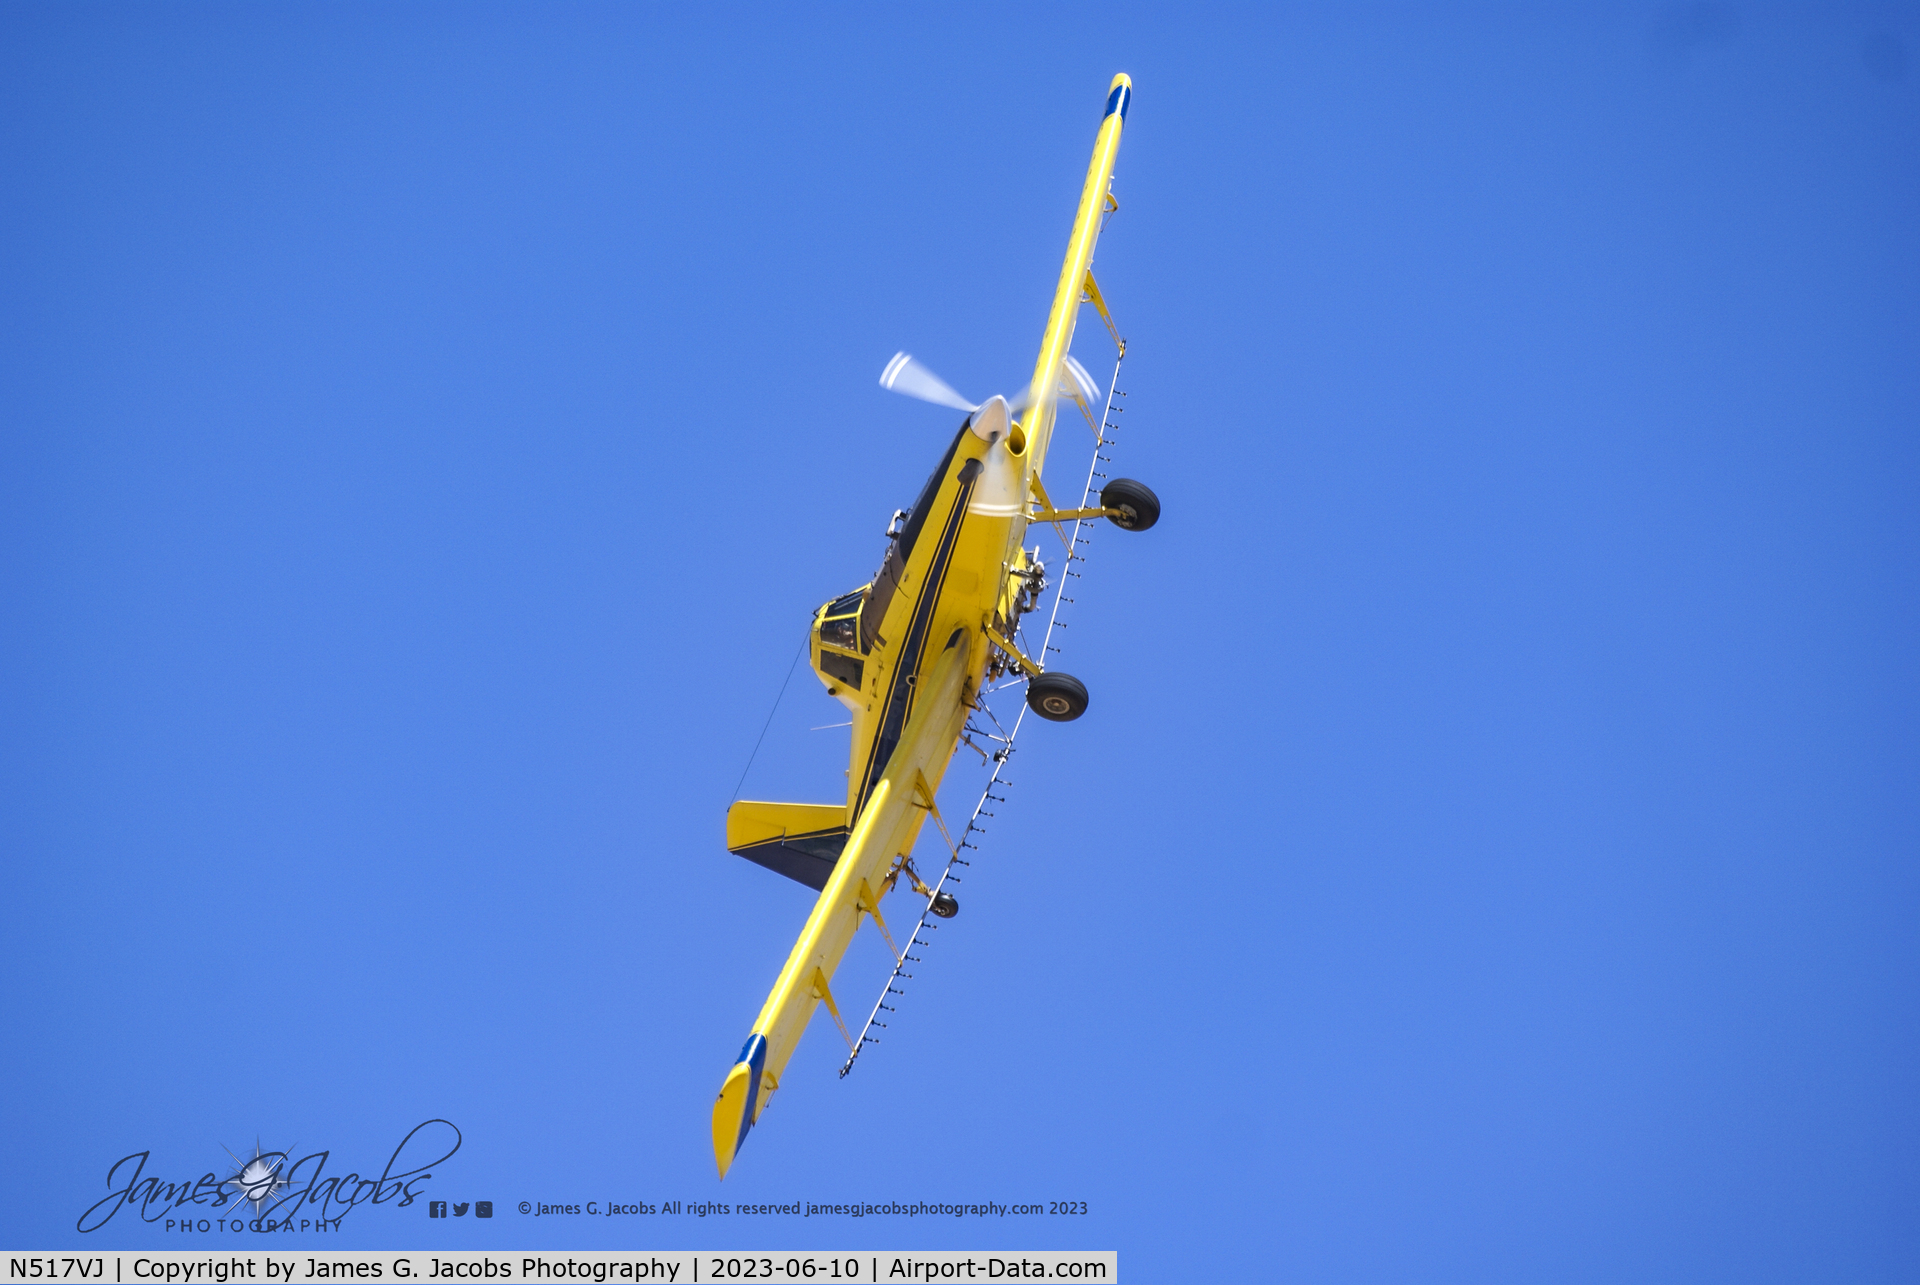 N517VJ, 2011 Air Tractor Inc AT-502B C/N 502B-2750, Air Tractor at a hard bank at a powerline after spraying a field